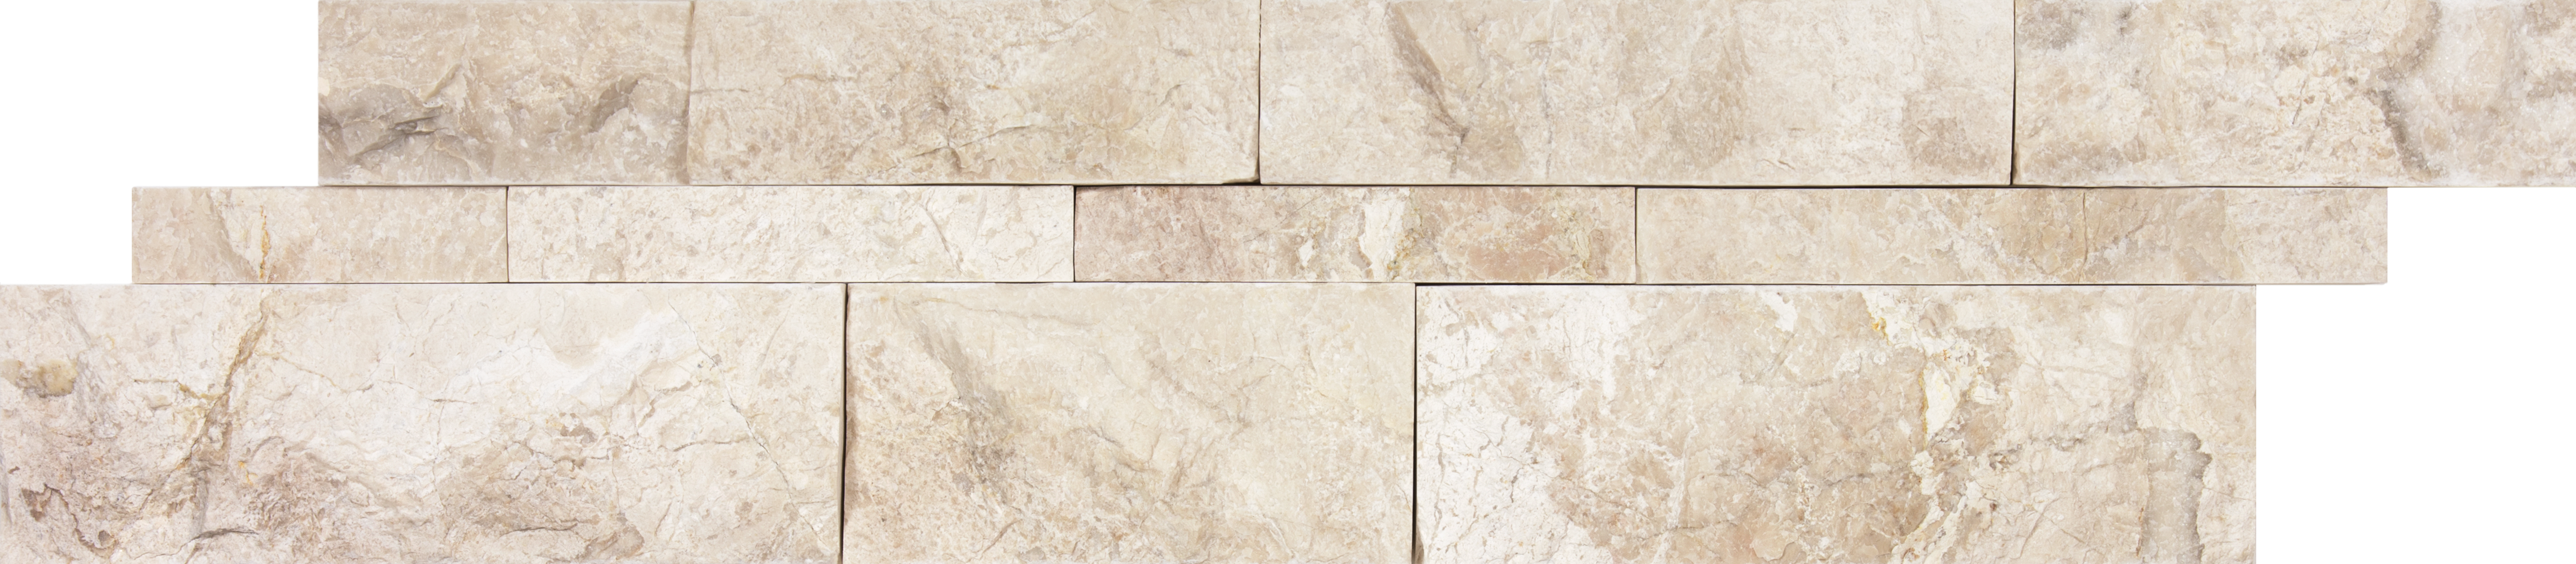 marble impero reale pattern natural stone wall panel from cubics anatolia collection distributed by surface group international split face finish straight edge edge 6x24 interlocking shape